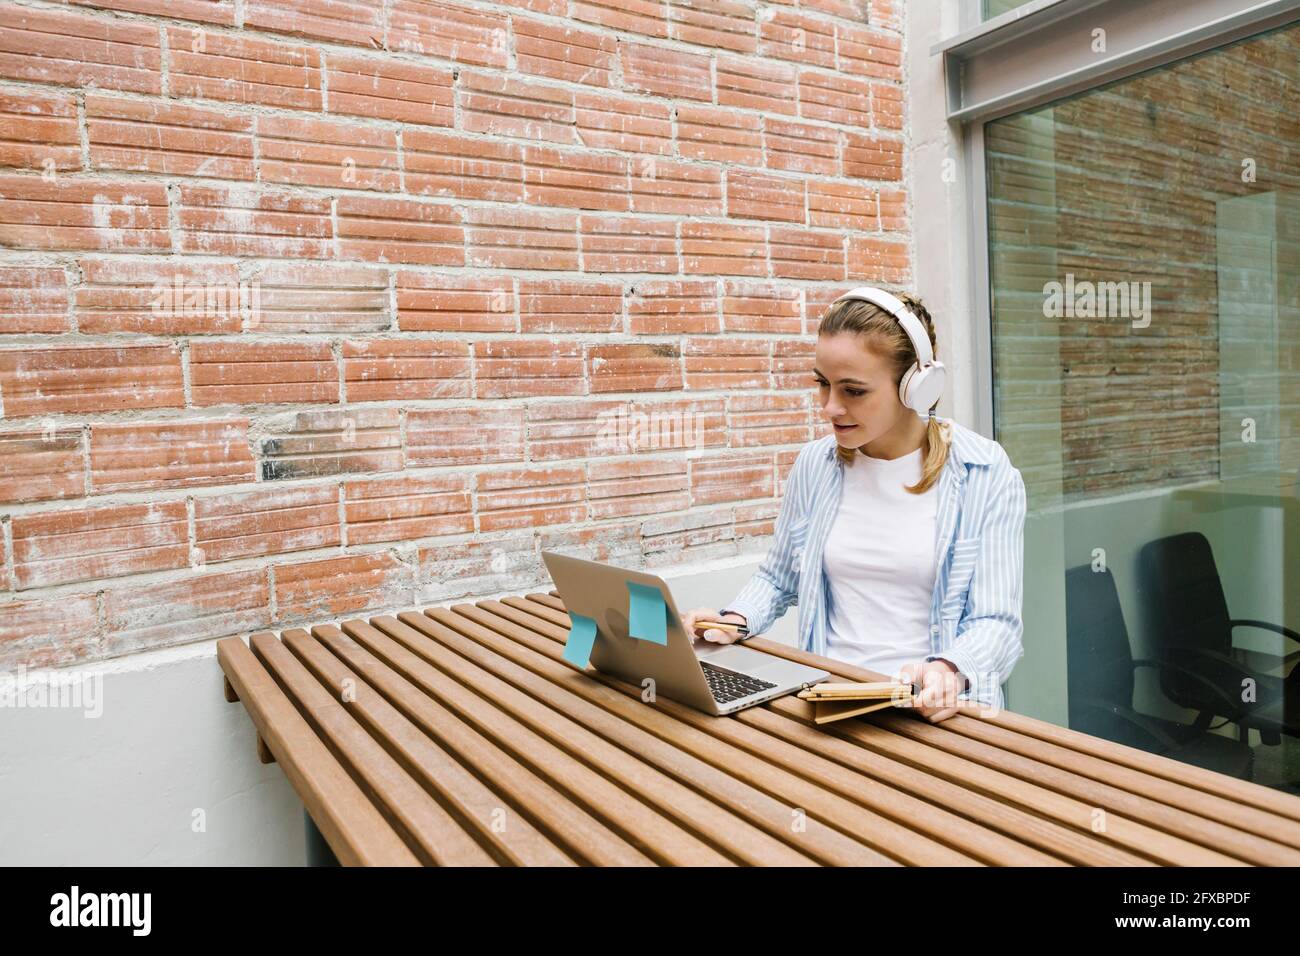 Female professional wearing headphones attending video call on laptop at cafeteria Stock Photo